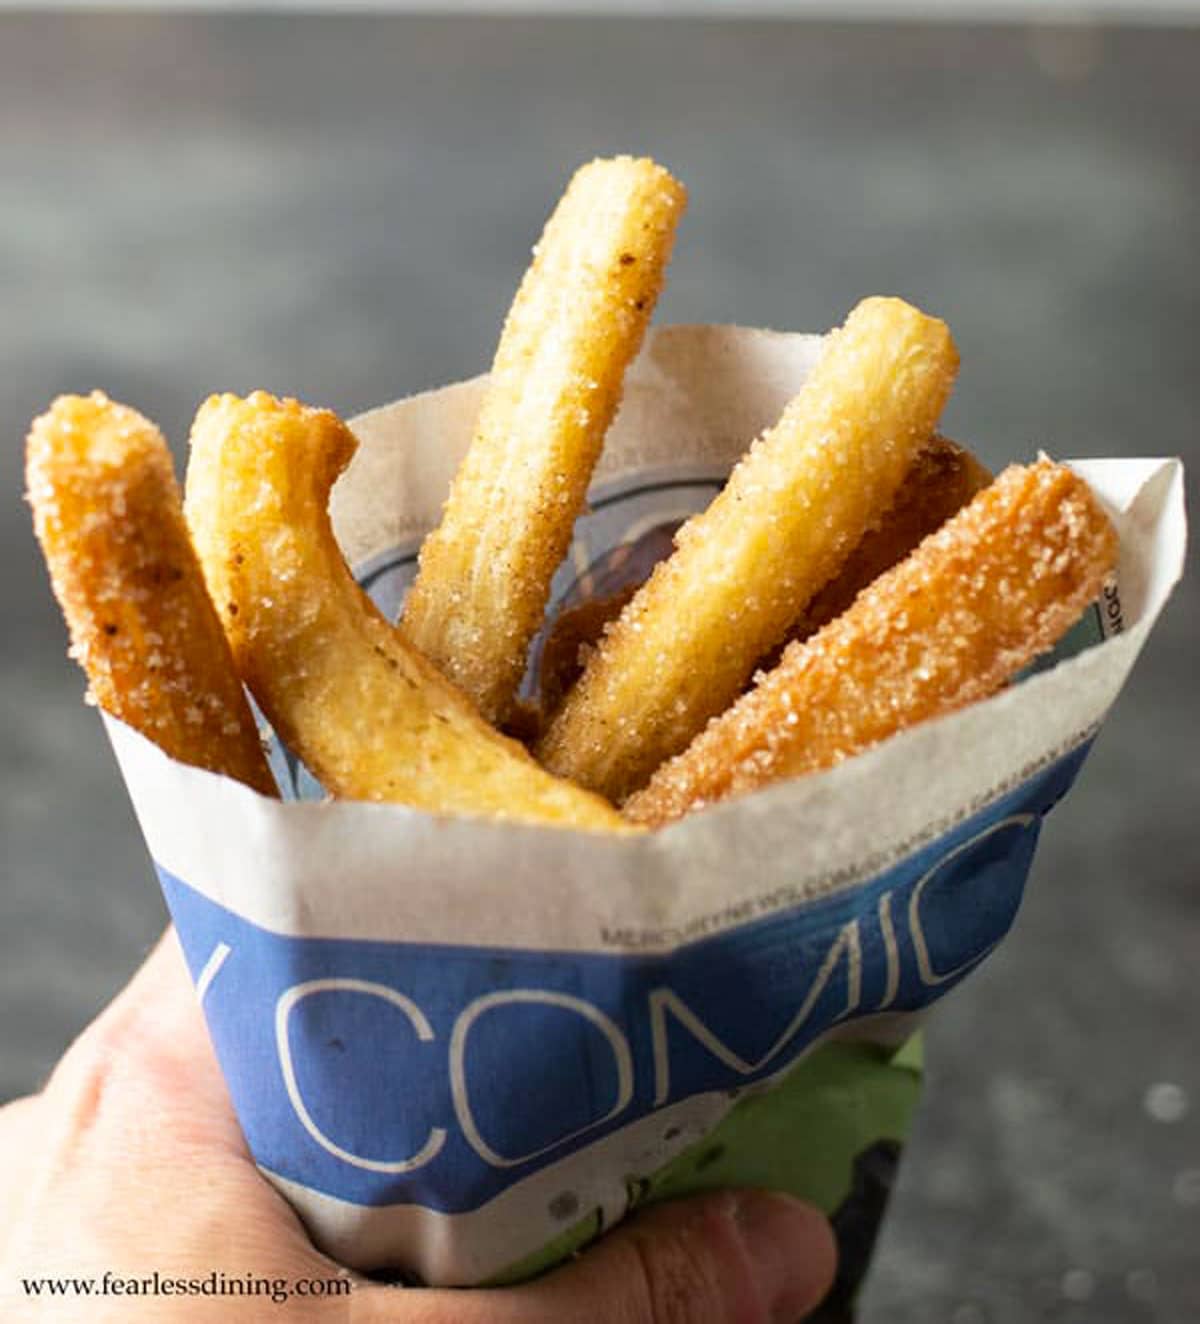 fried churros wrapped in the comic section of newspaper